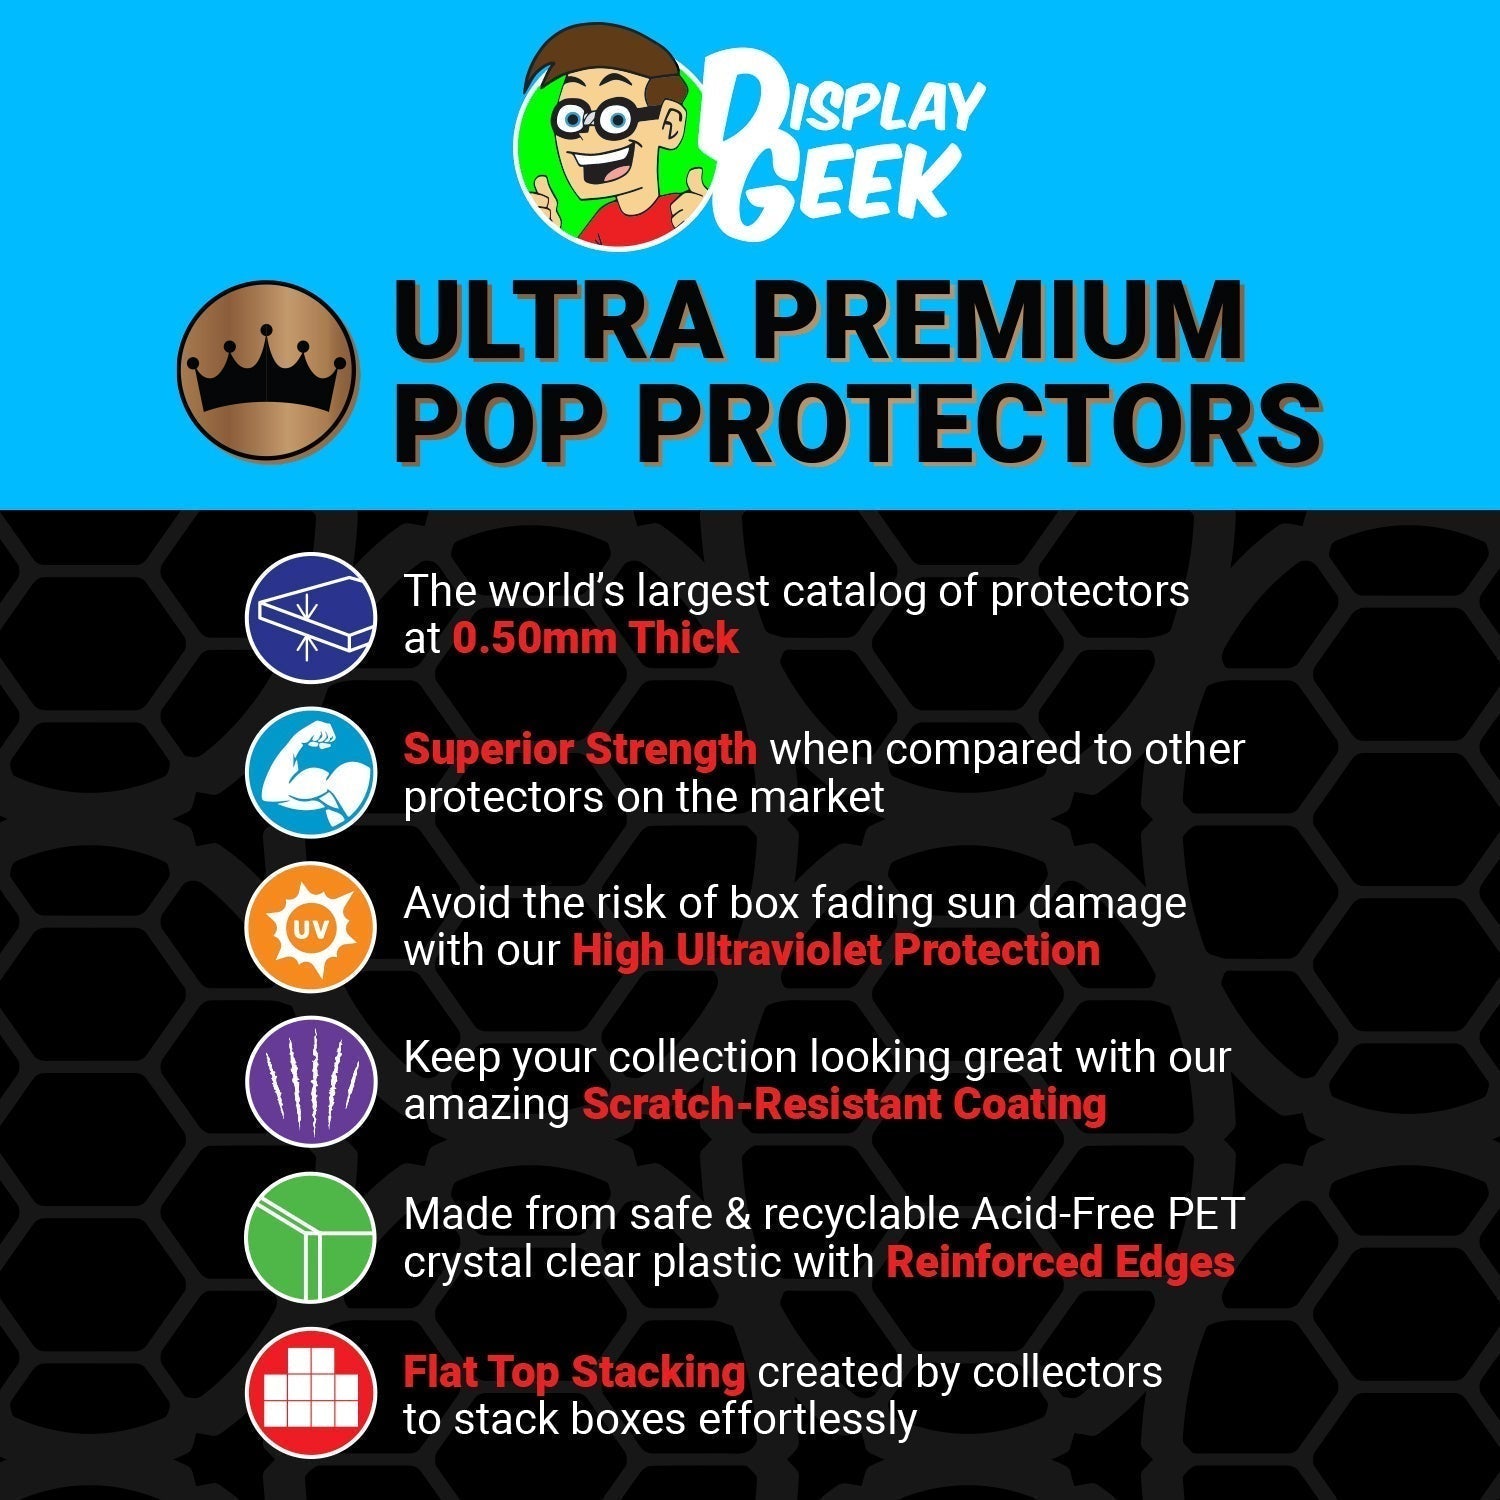 Pop Protector for Vynl 2 Pack Rey & Kylo Ren Funko - PPG Pop Protector Guide Search Created by Display Geek